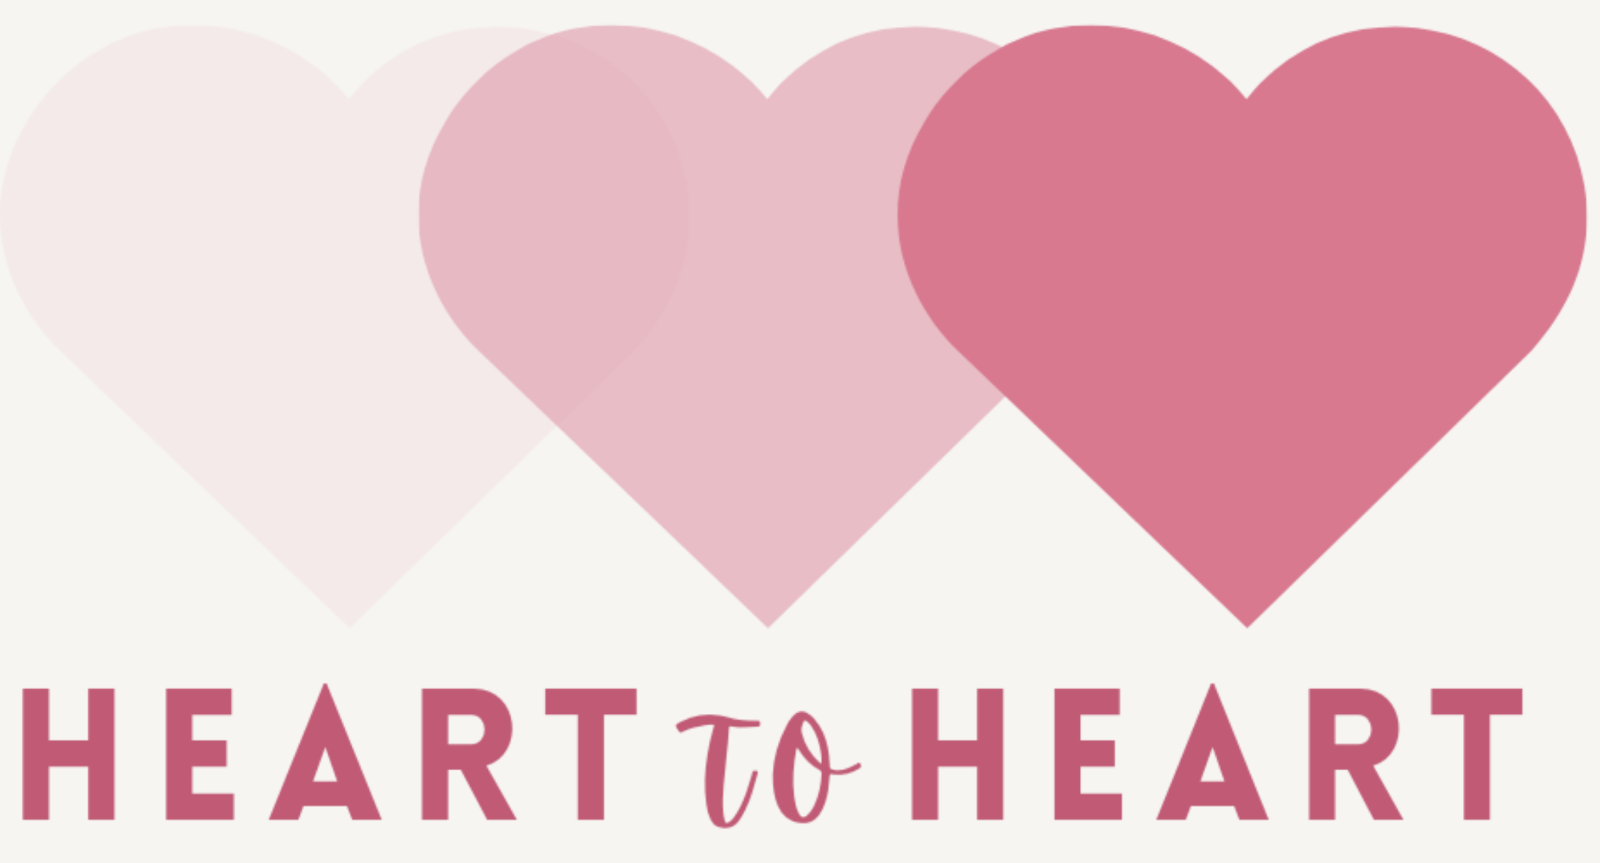 logo for fundraising campaign with three hearts slightly overlapped that are white, pink and dark pink with Heart to Heart written underneath